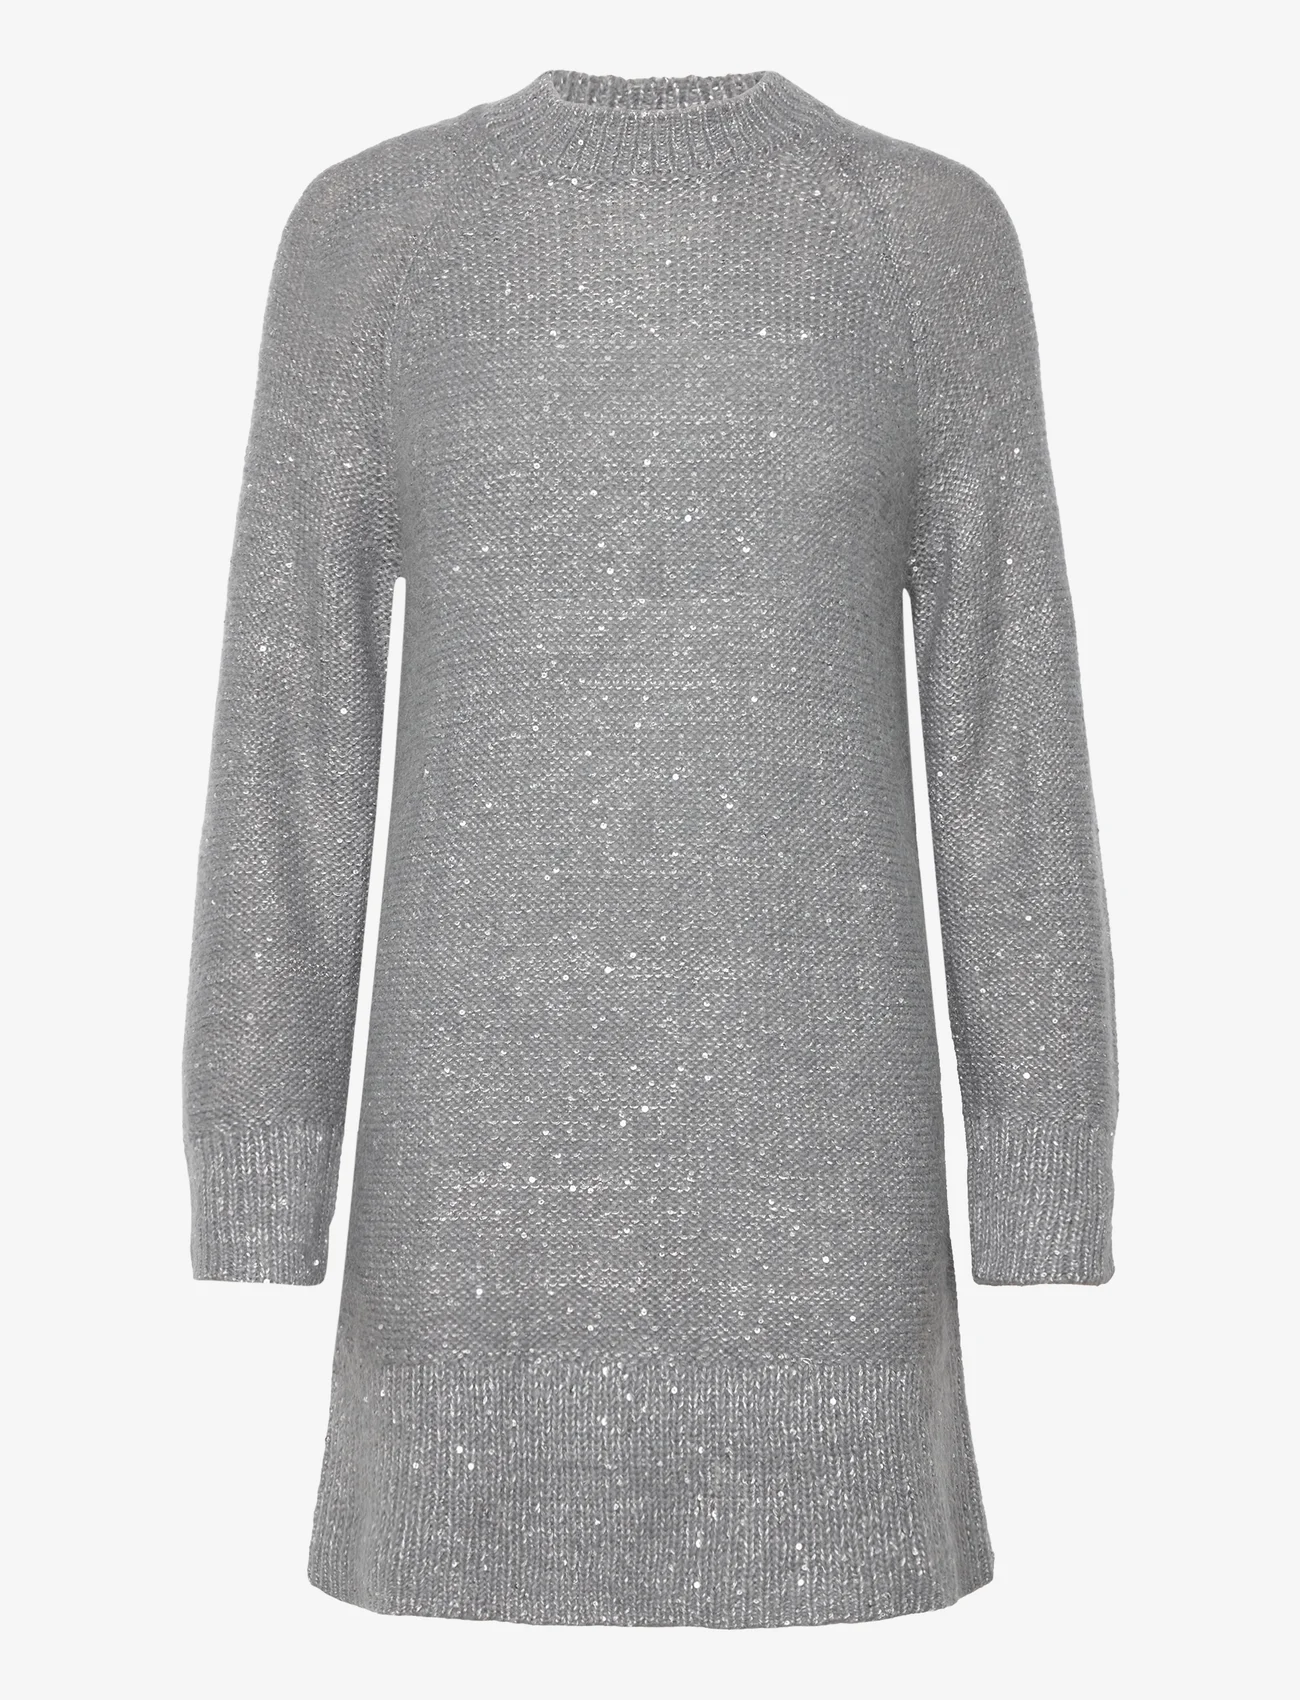 by Ti Mo - Glitter Knit Dress - knitted dresses - 051 - silver - 0